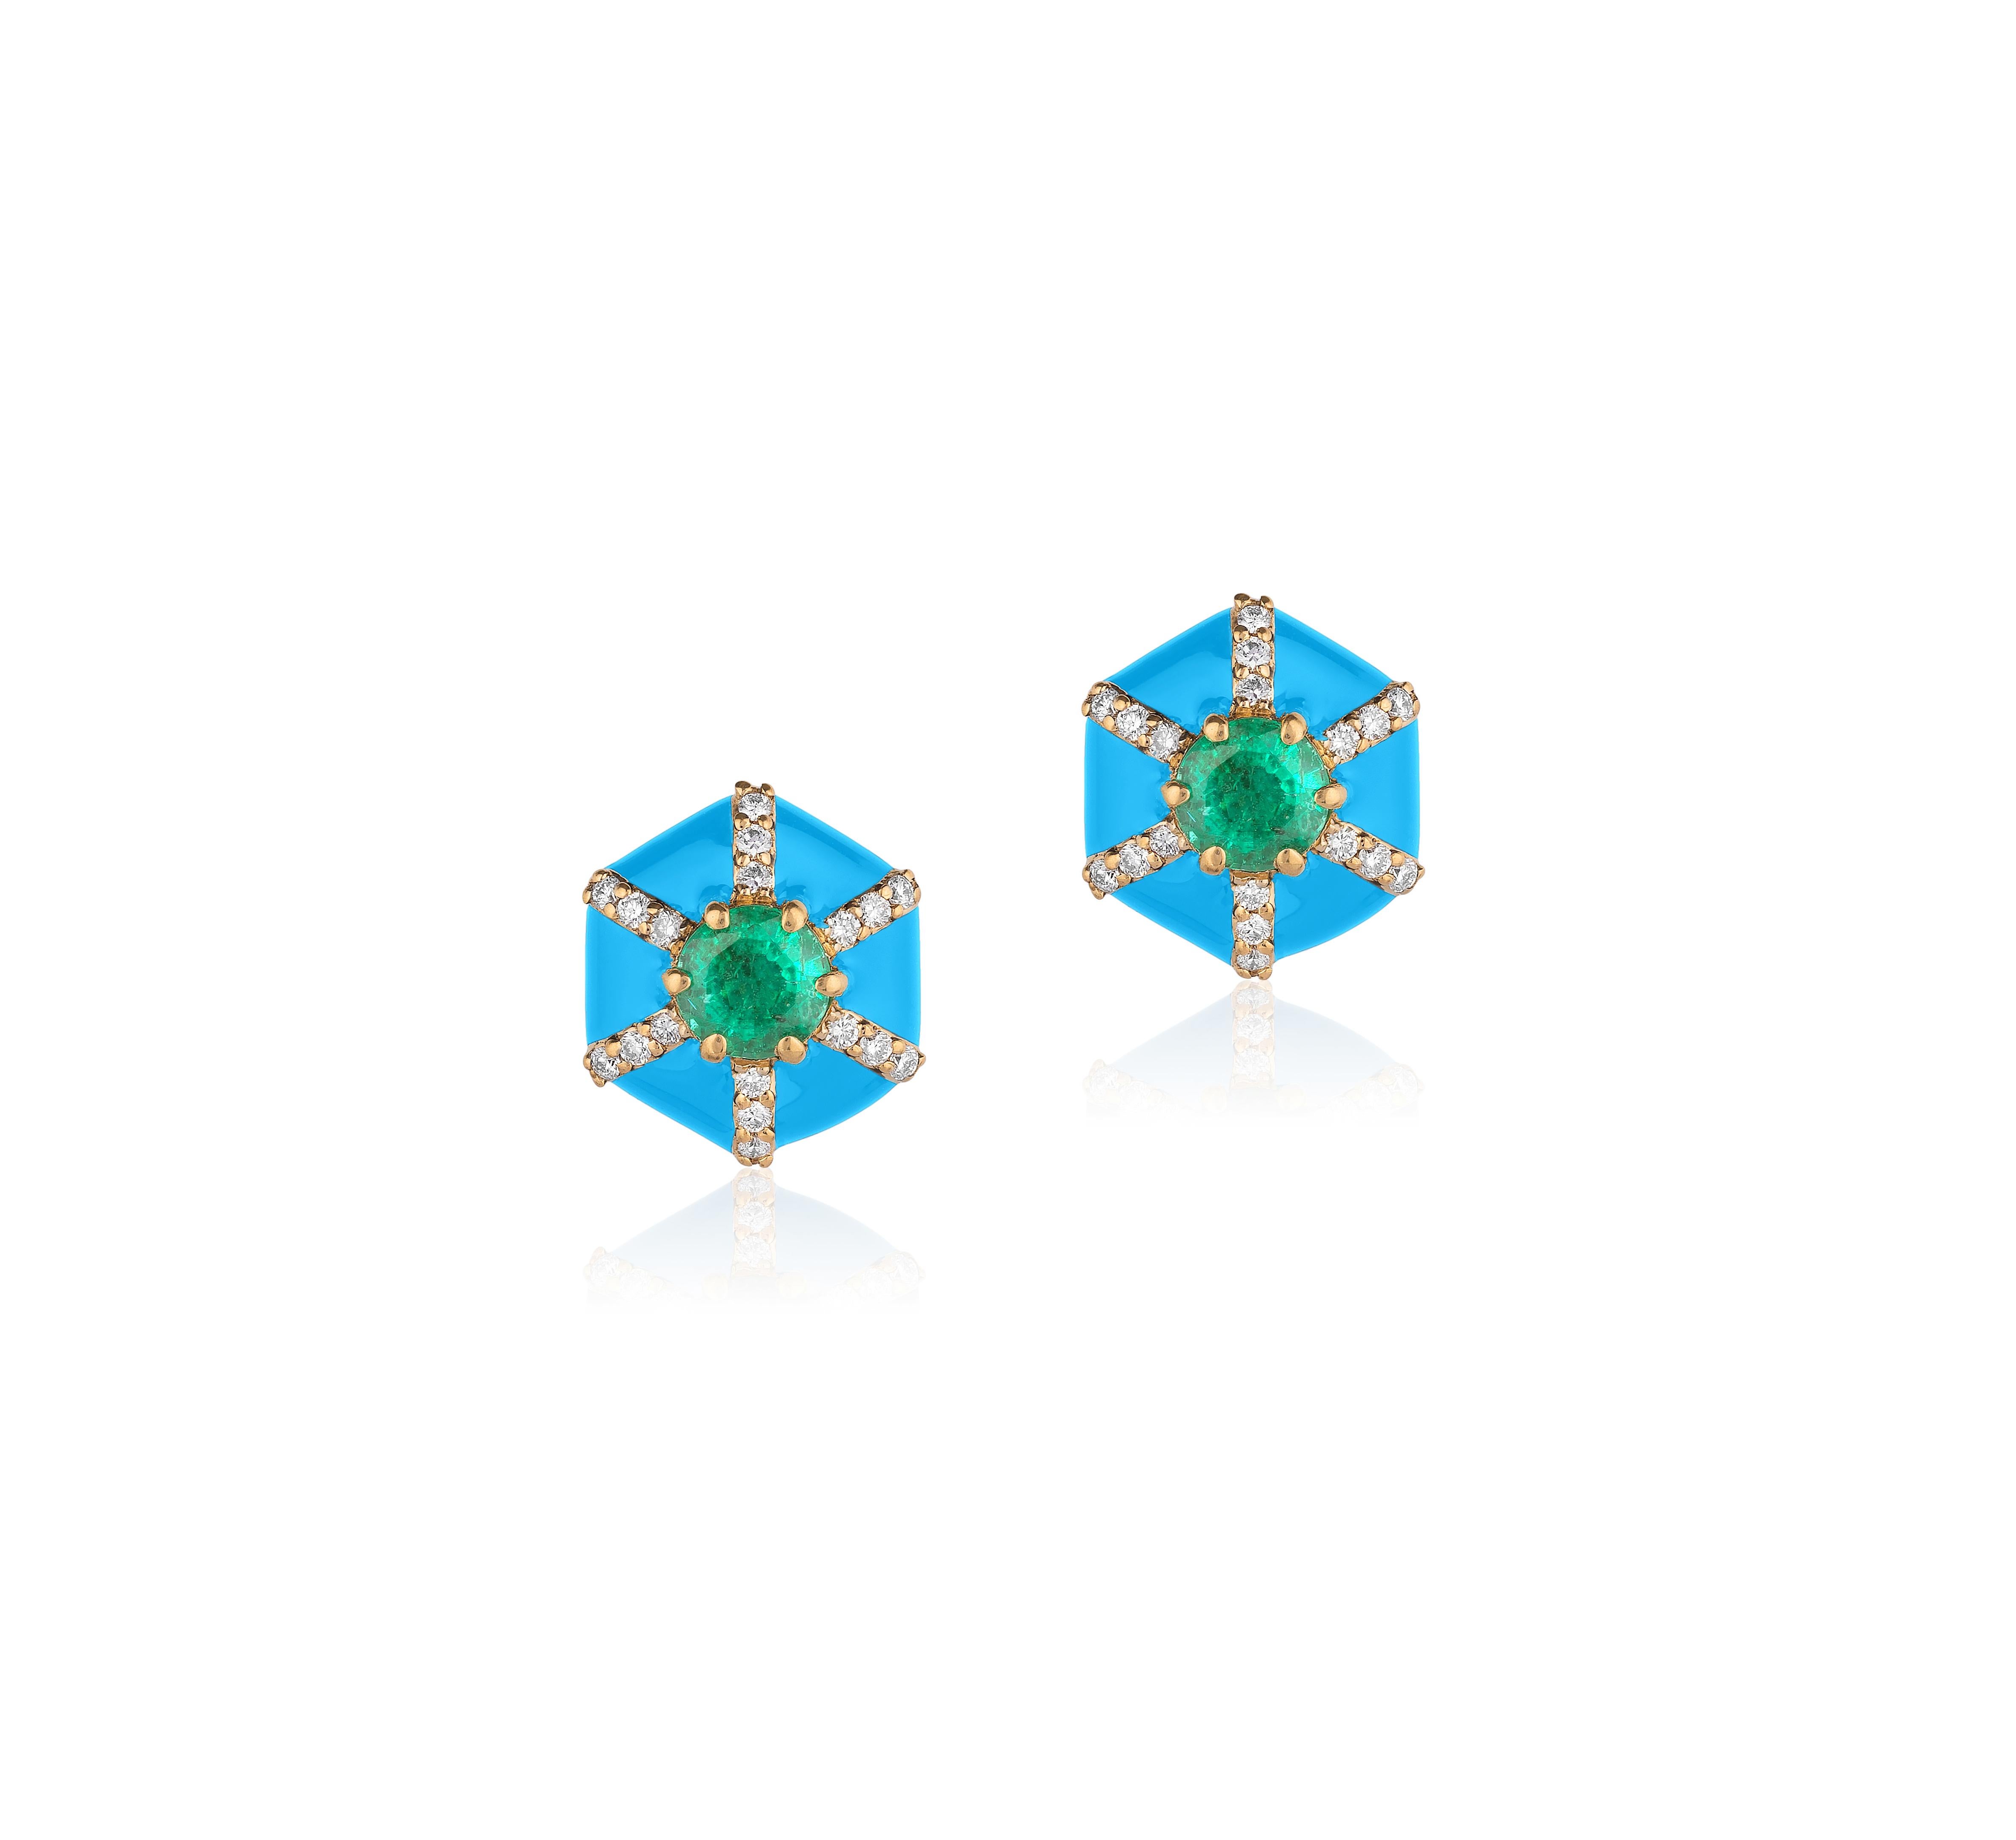 Turquoise Enamel Stud Earrings with Emerald and Diamonds in 18K Yellow Gold. from 'Queen' Collection
Stone Size: 4 mm
Gemstone Approx. Wt: Emerald- 0.52 Carats 
Diamonds: G-H / VS, Approx. Wt: 0.13 Carats